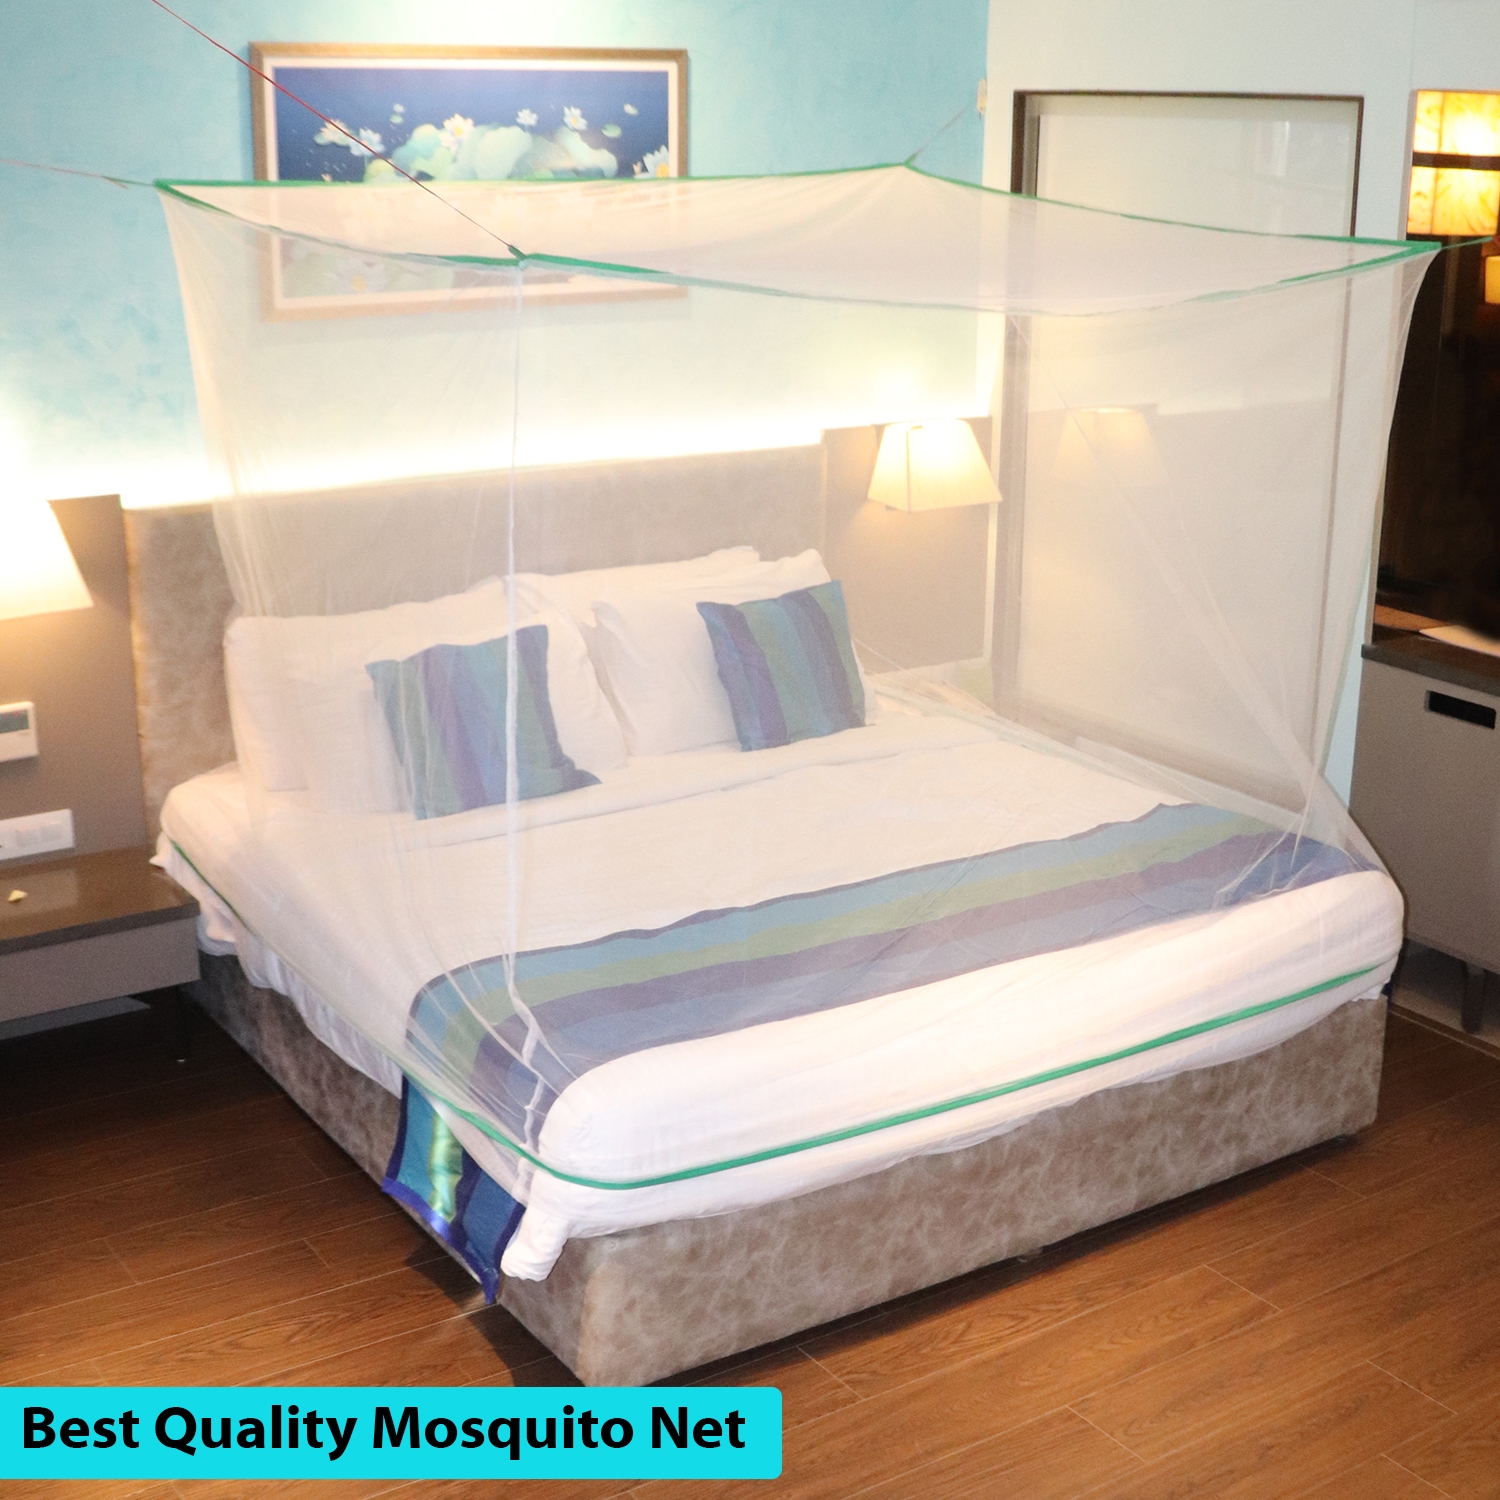 Paola Jewels | Mosquito Net for Double Bed, King-Size, Square Hanging Foldable Polyester Net White And Green 1